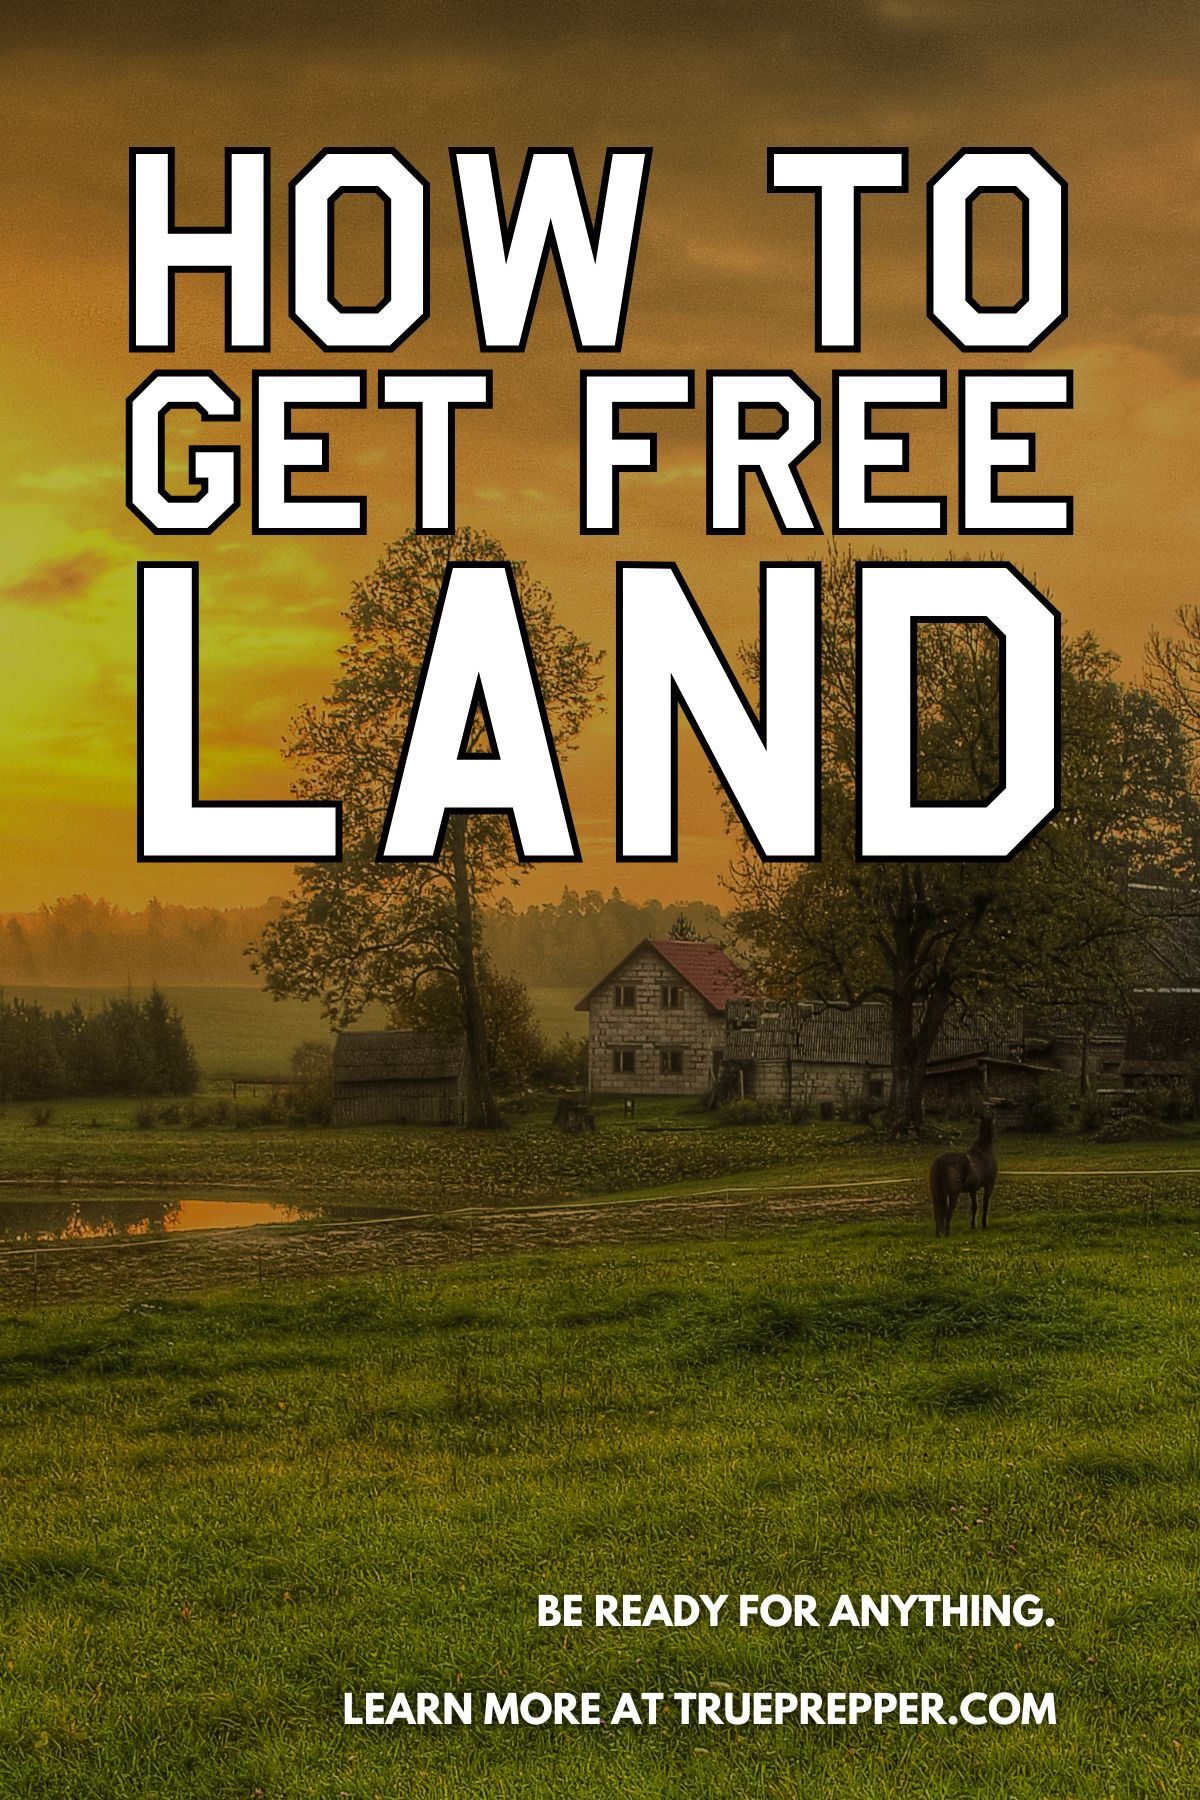 How to Get Free Land